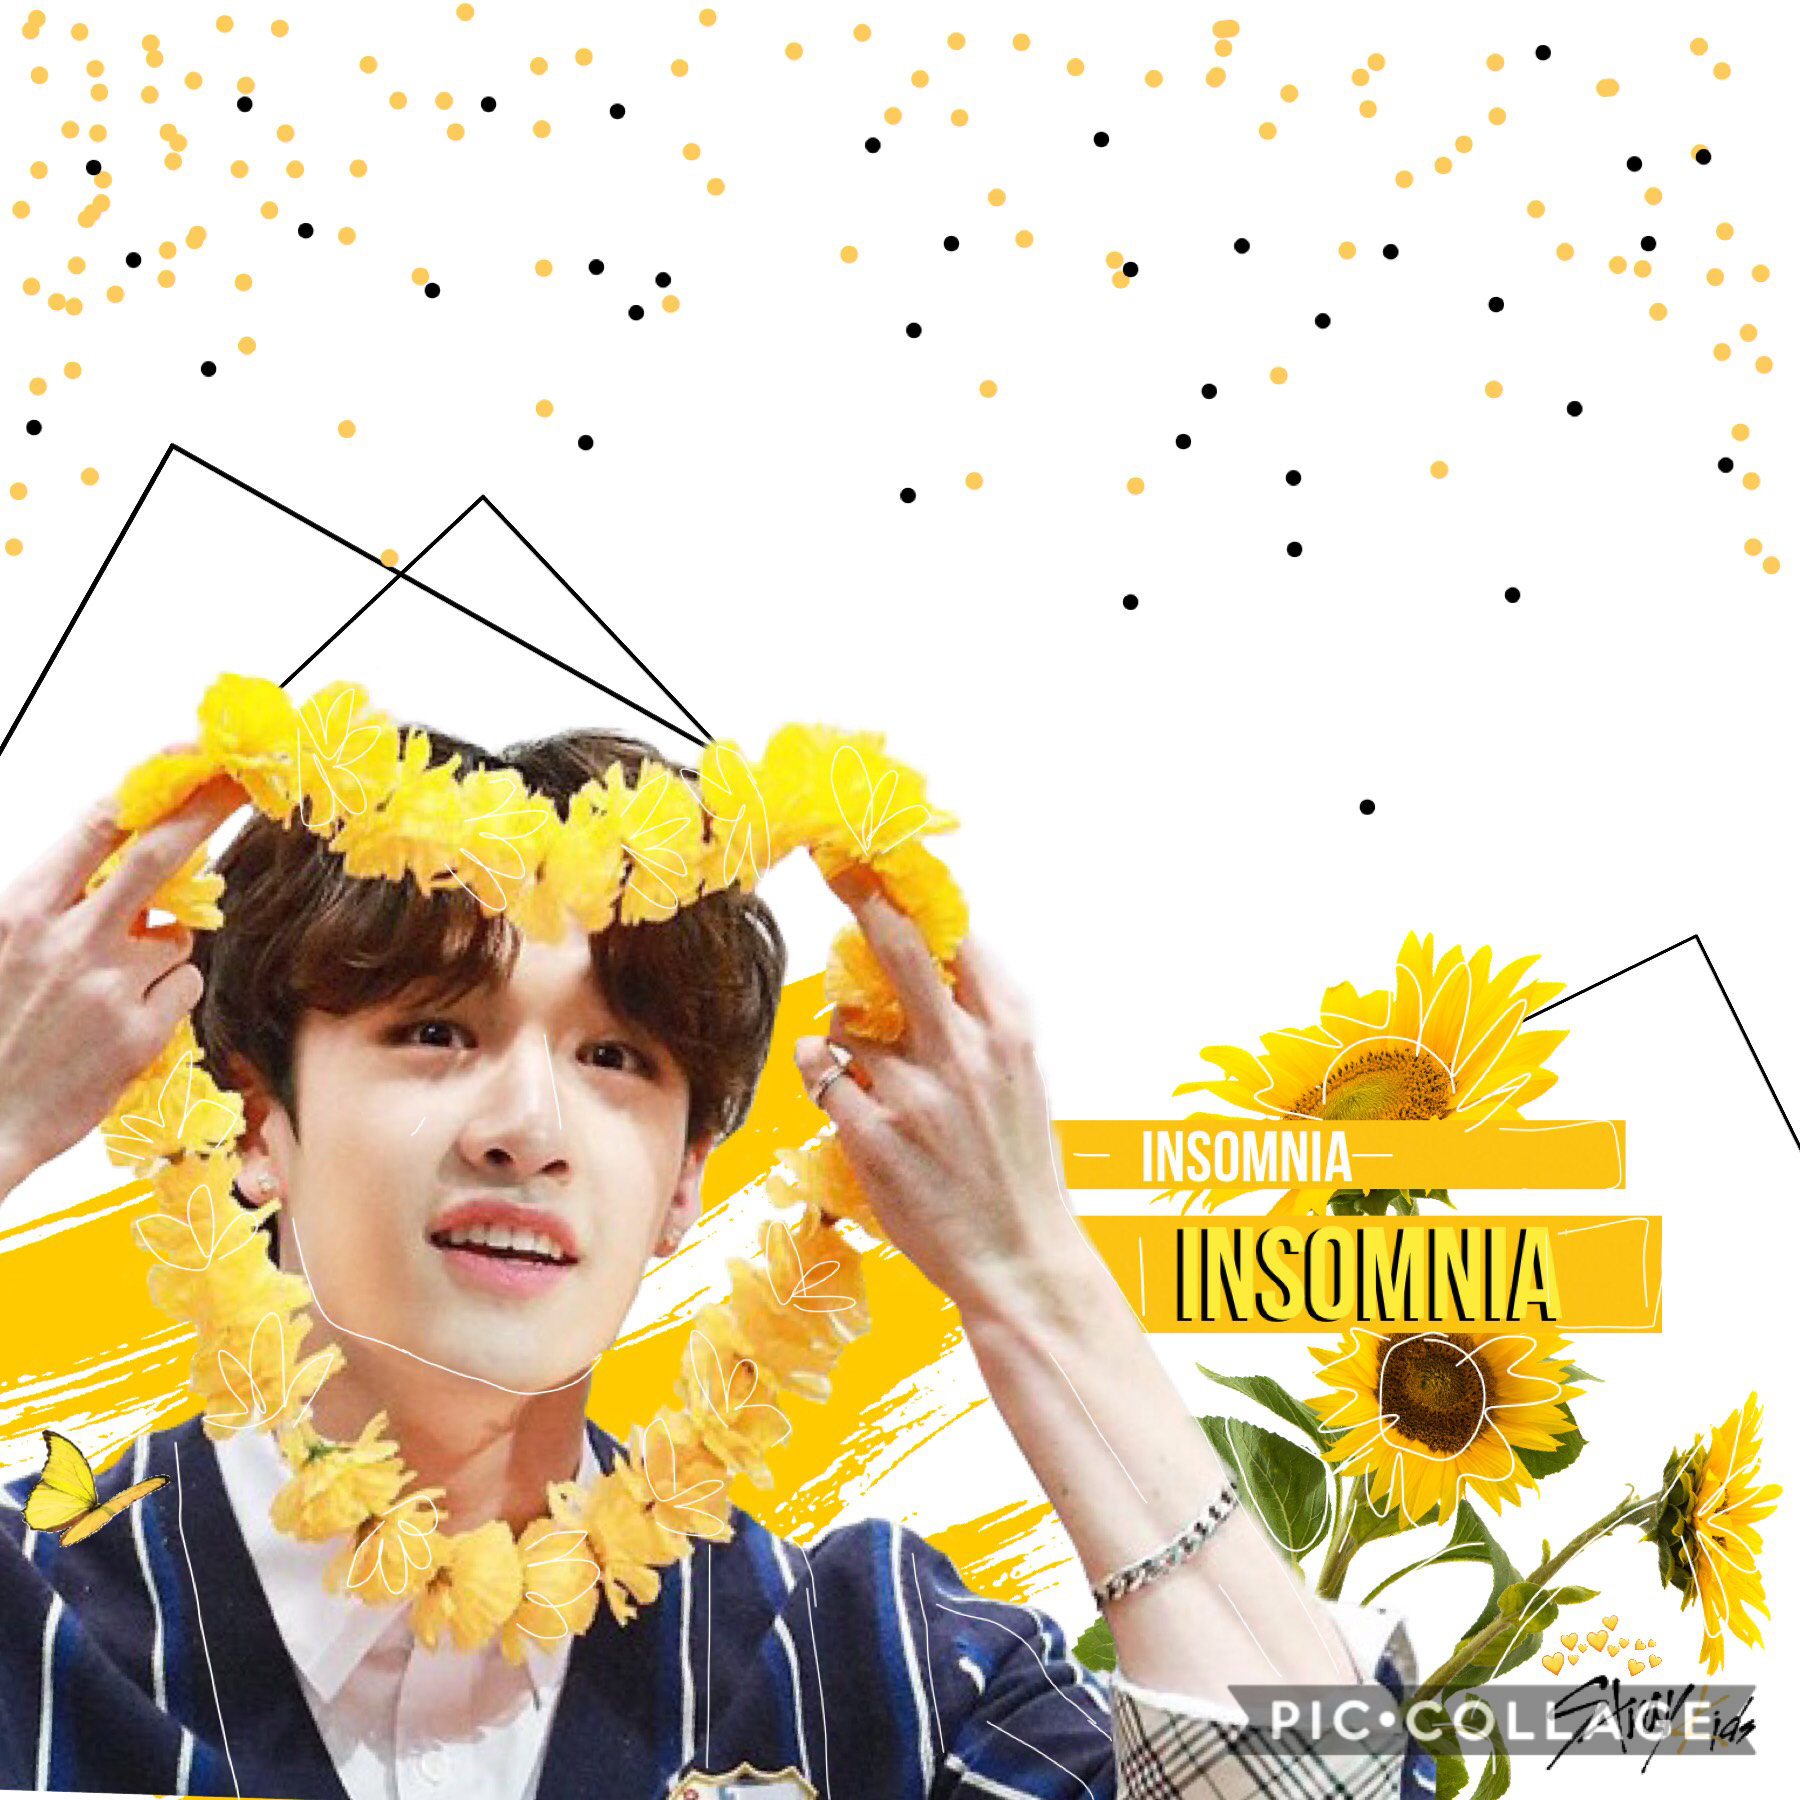 🌻💛Caption in comments💛🌻